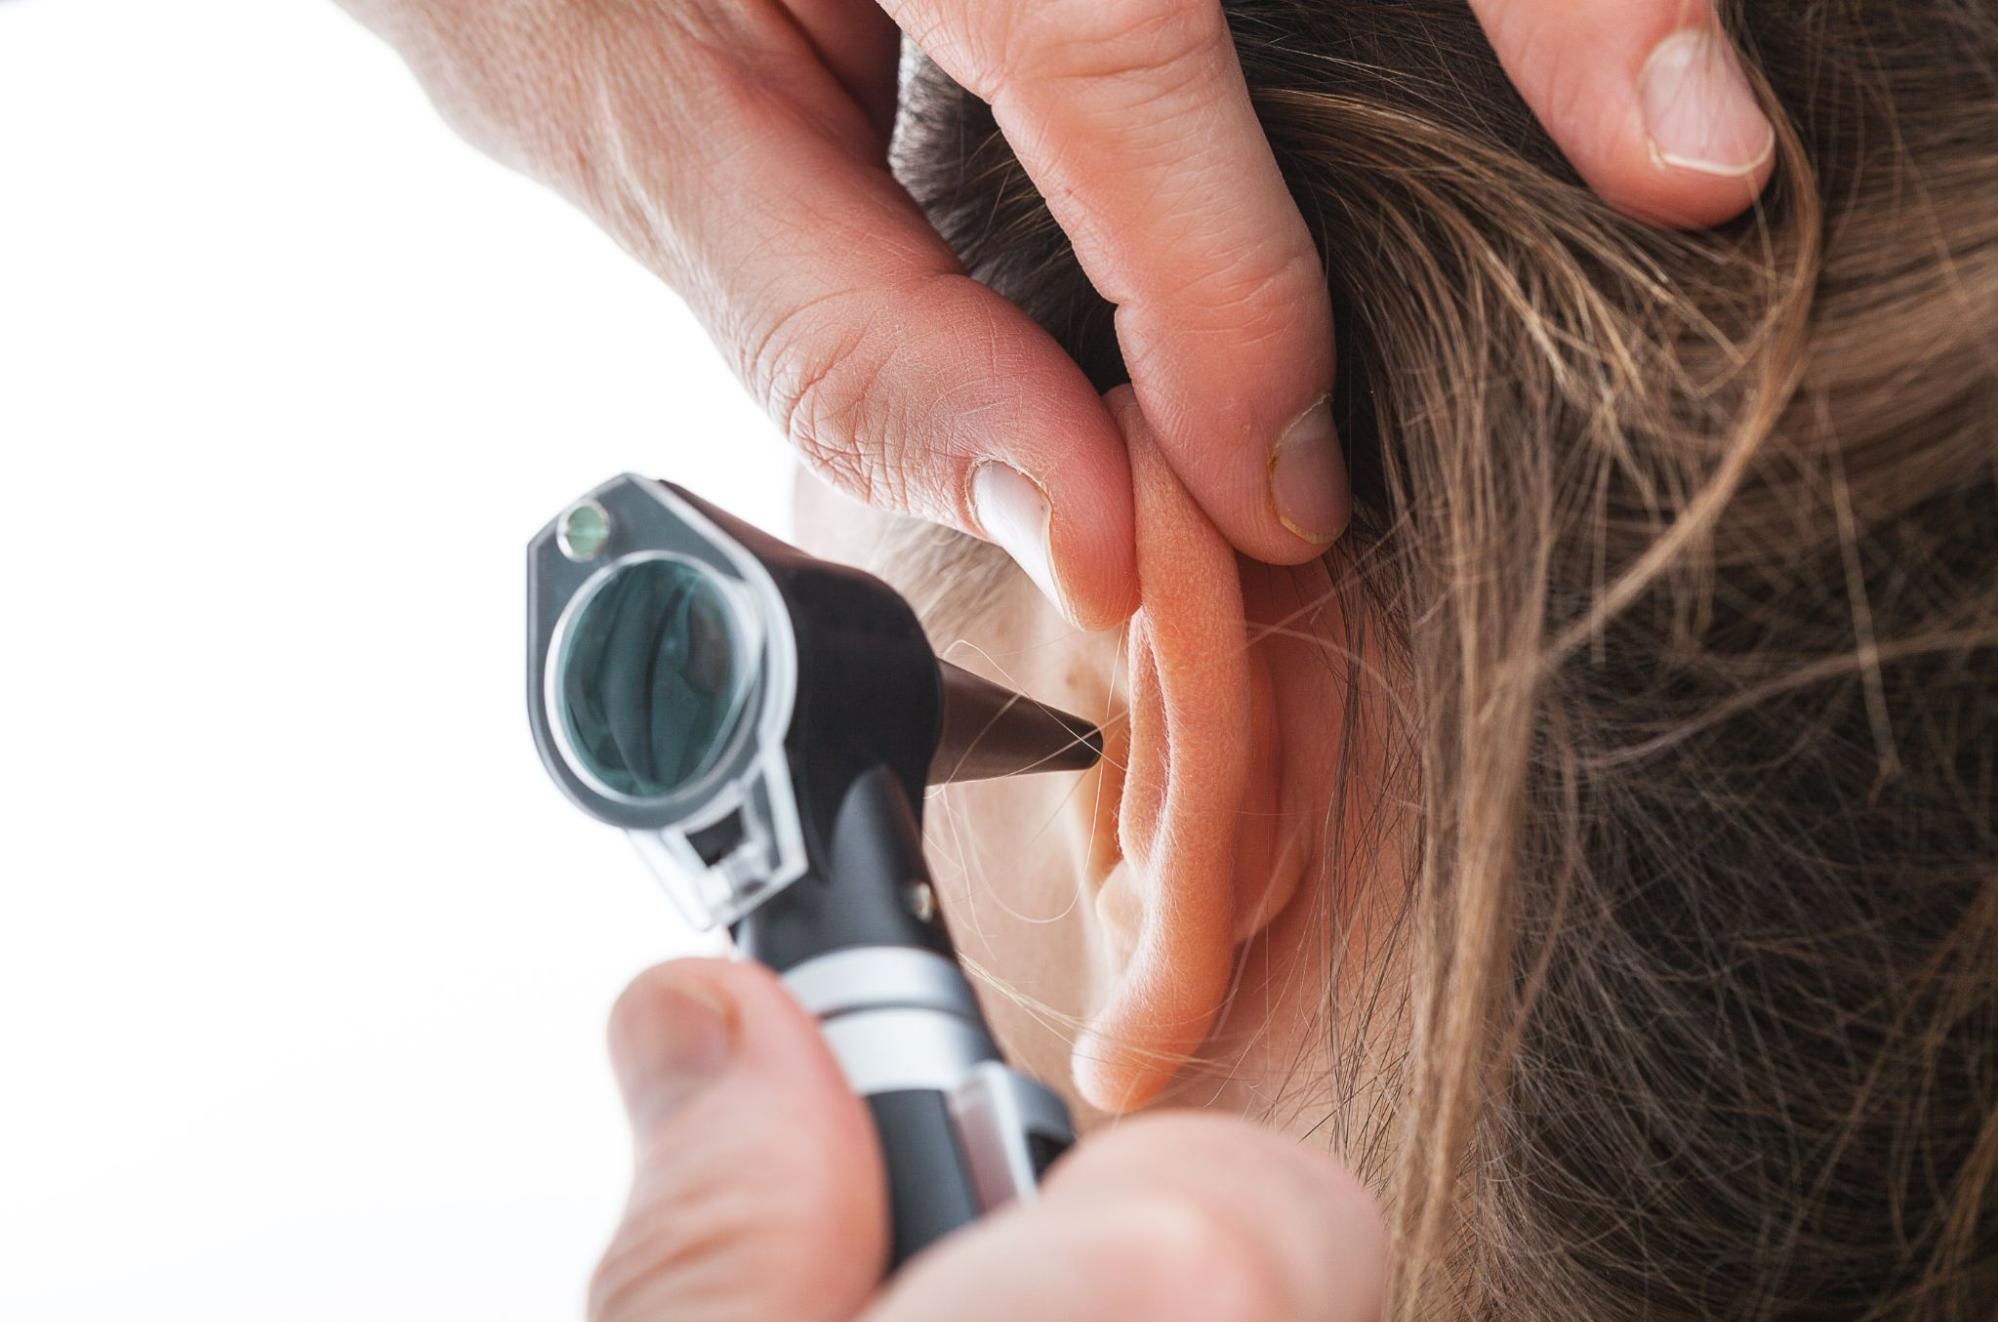 Person examining another person's ear with an otoscope